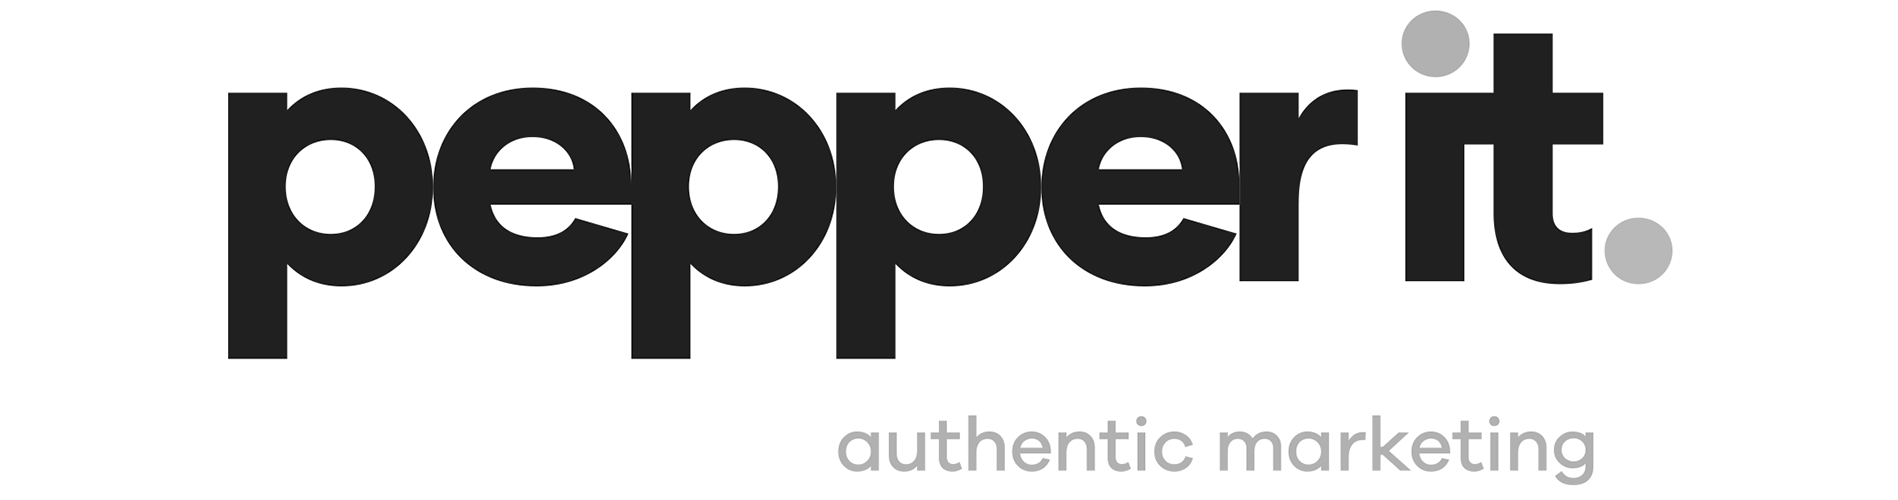 pepper_logo_black and white_website.png